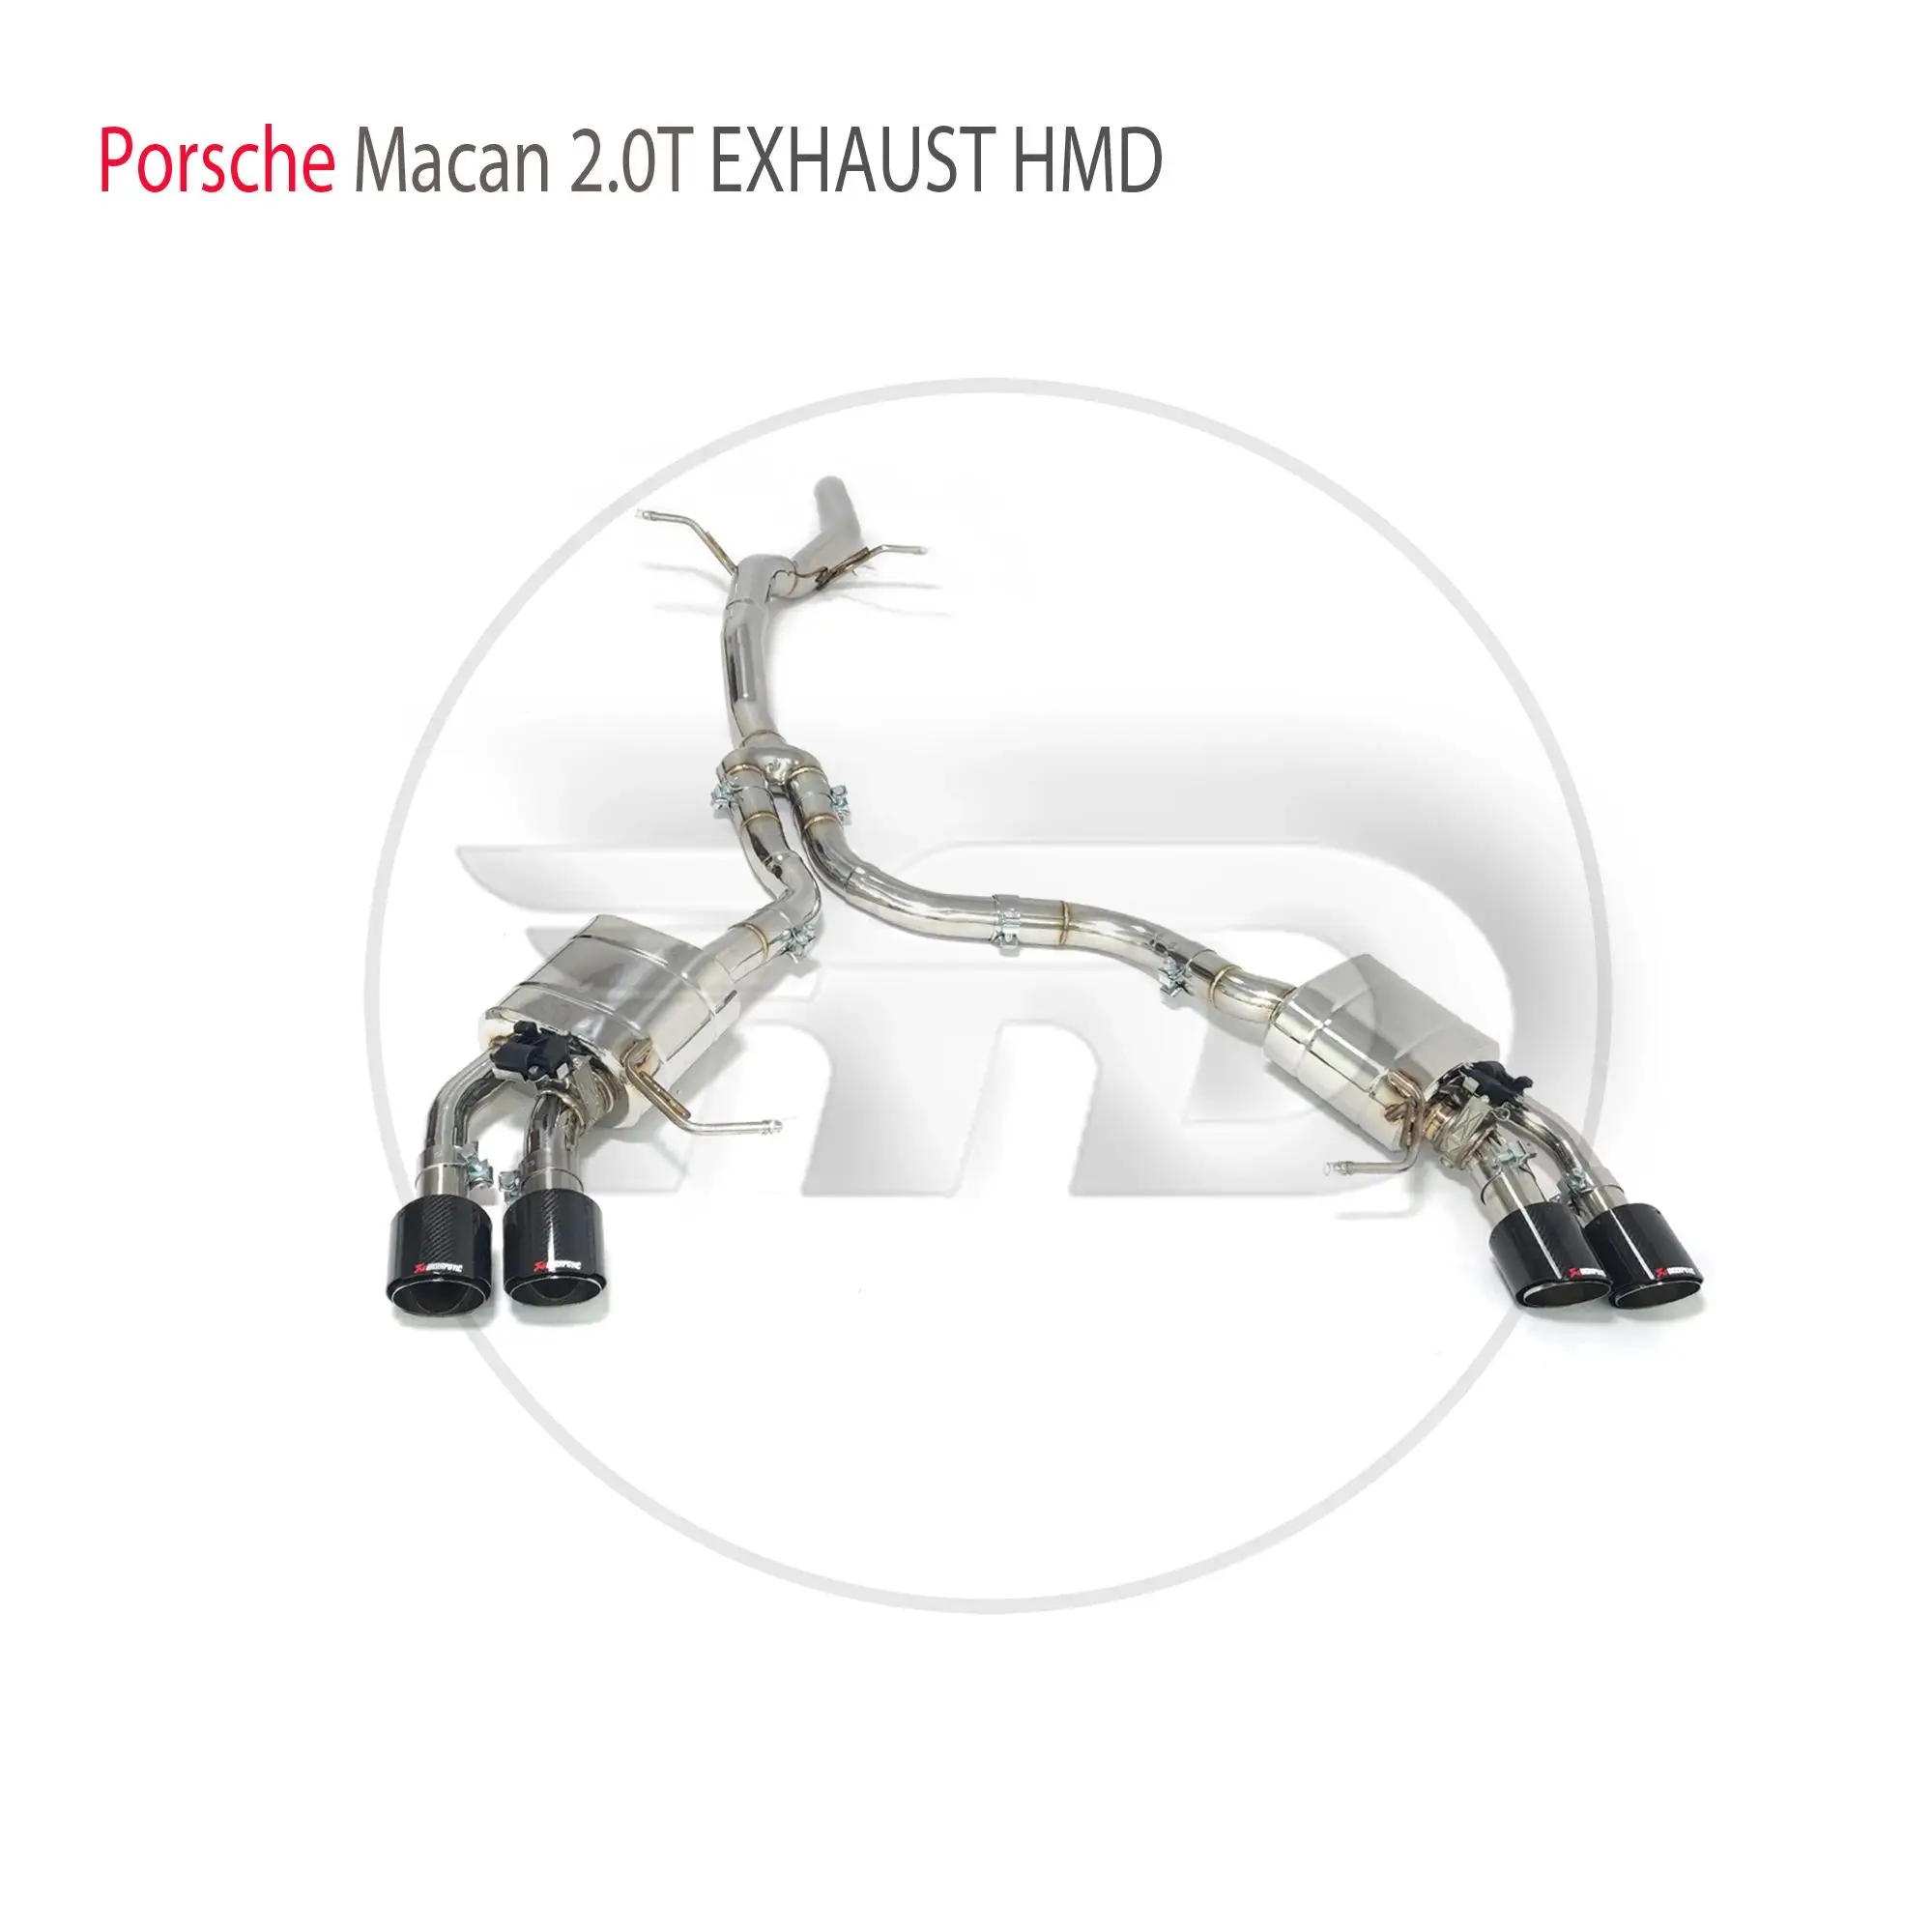 

HMD Stainless Steel Exhaust System Performance Catback for Porsche Macan 2.0T 95B Auto Electronic Valve Muffler